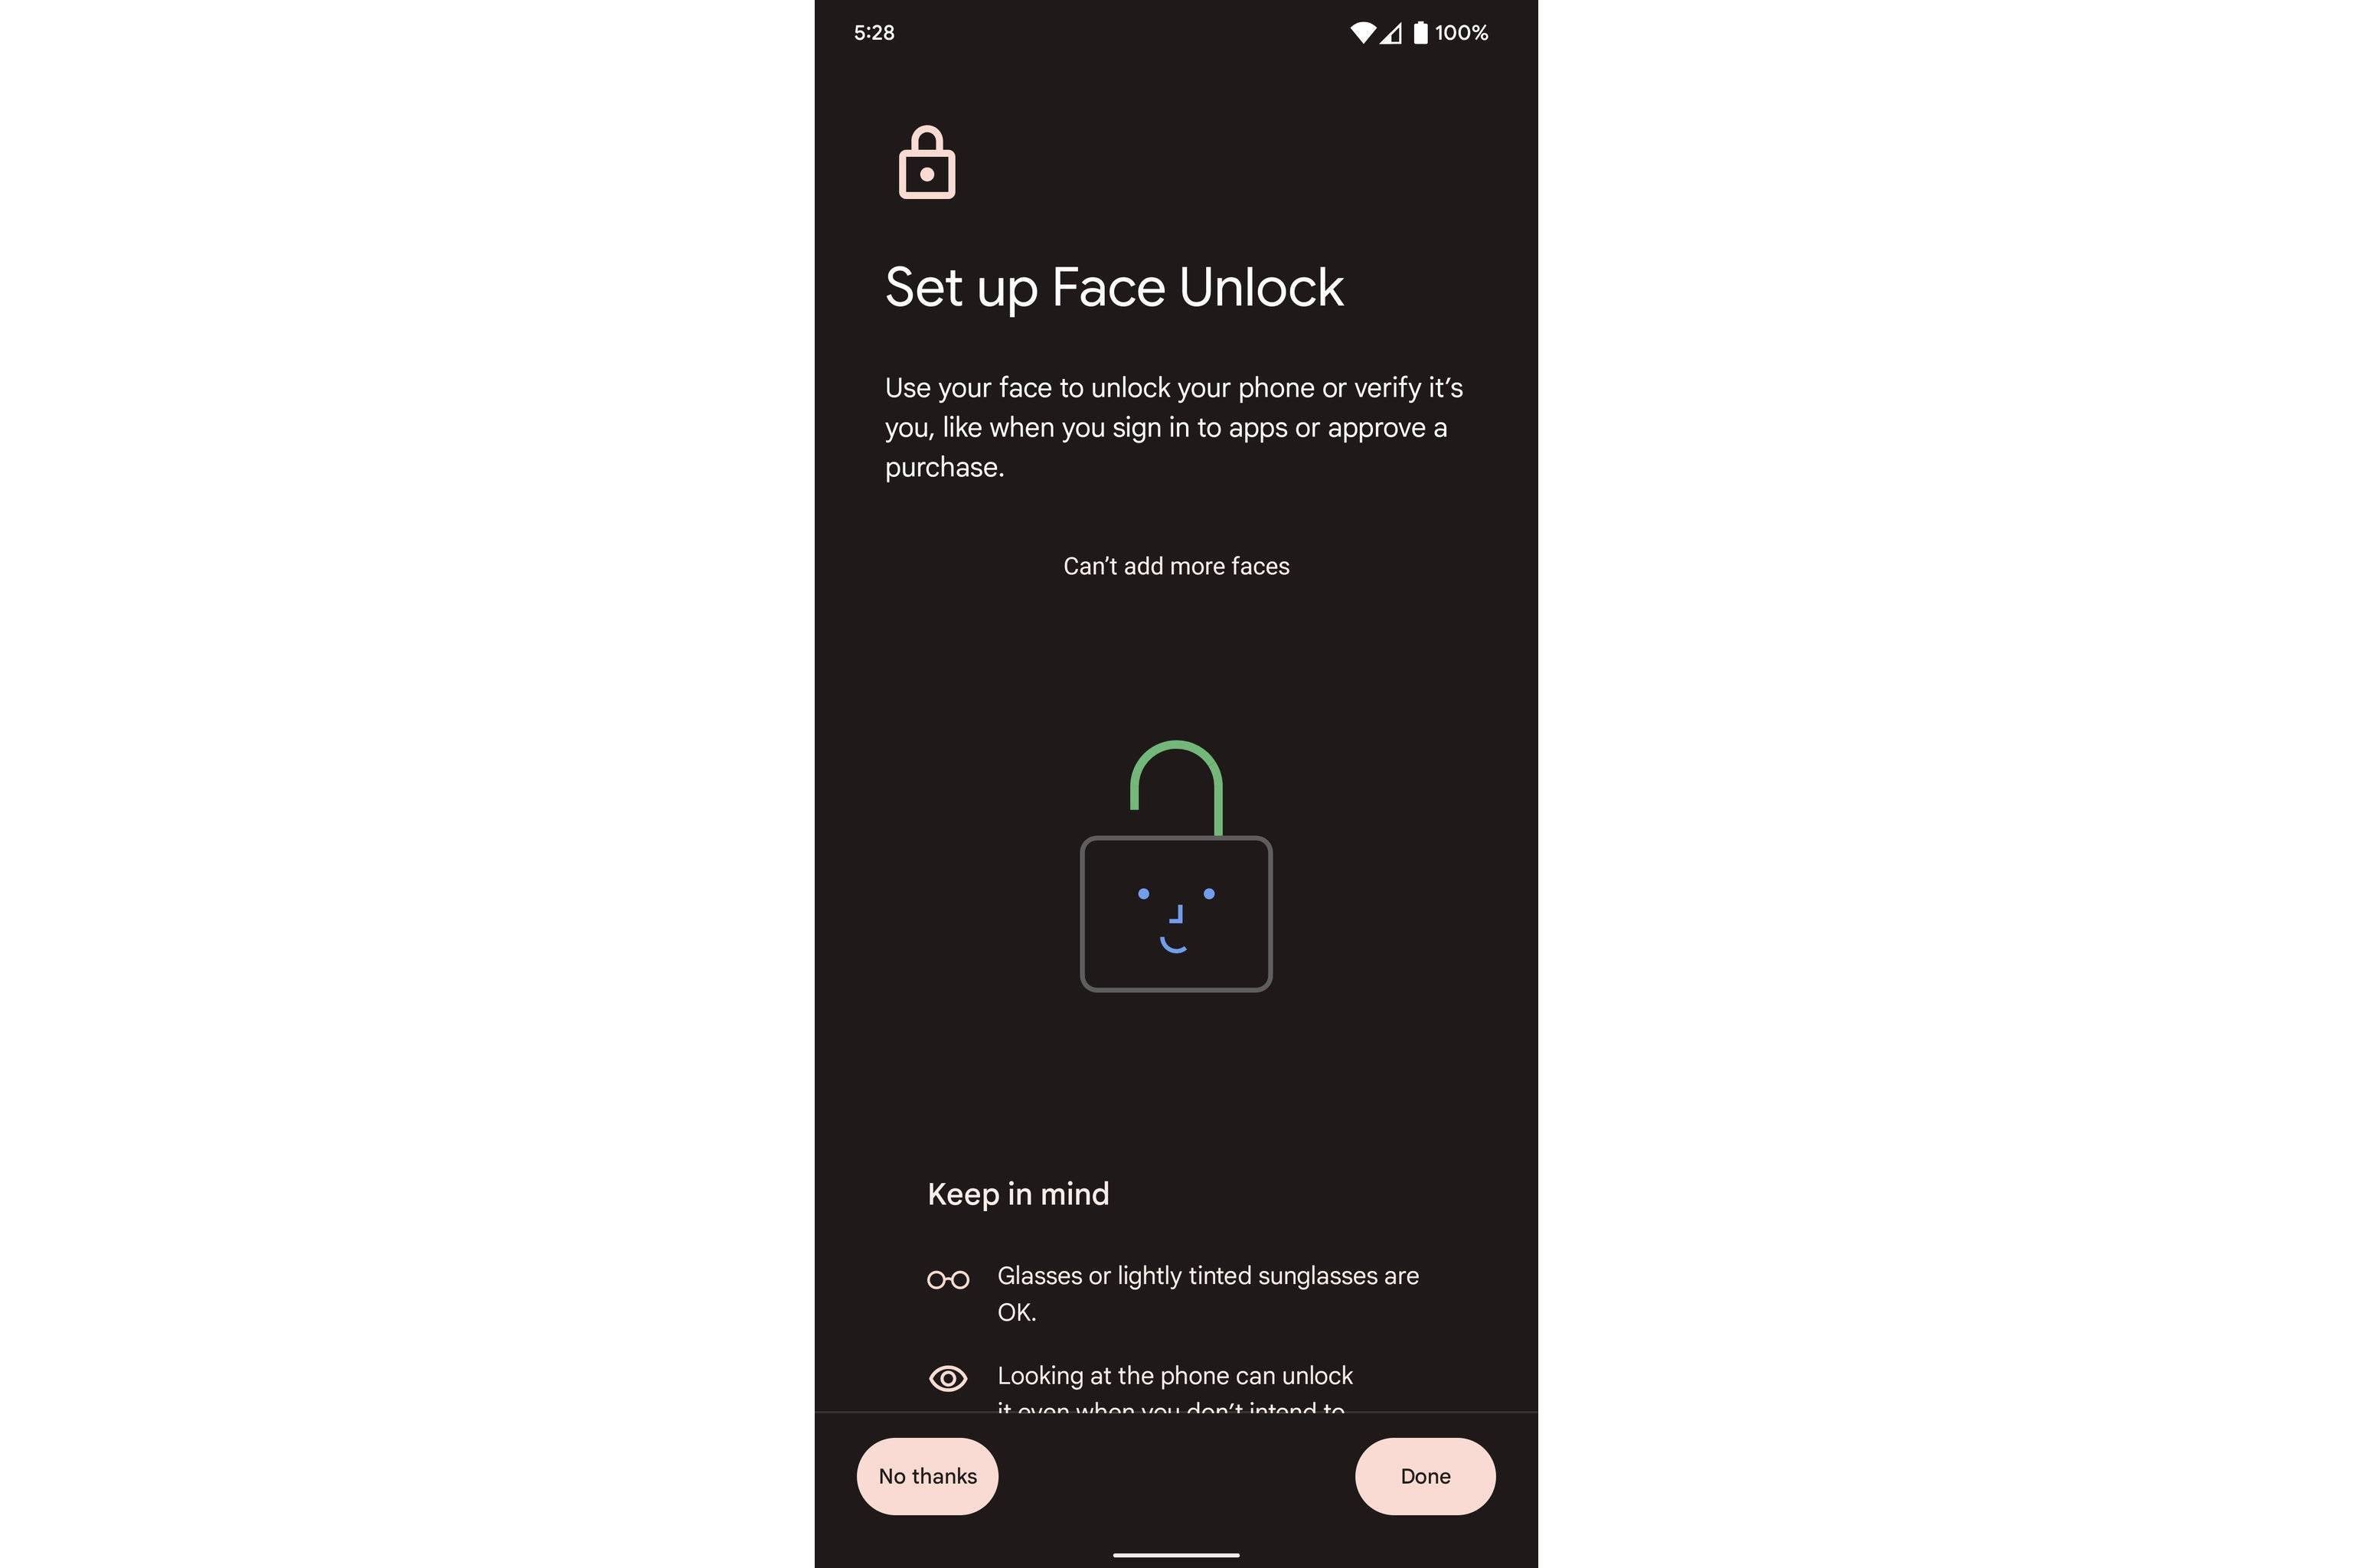 Android 13 beta 1 brings the face unlock setting to the Pixel 6 Pro - Face Unlock setting appears on Pixel 6 Pro after Android 13 Beta 1